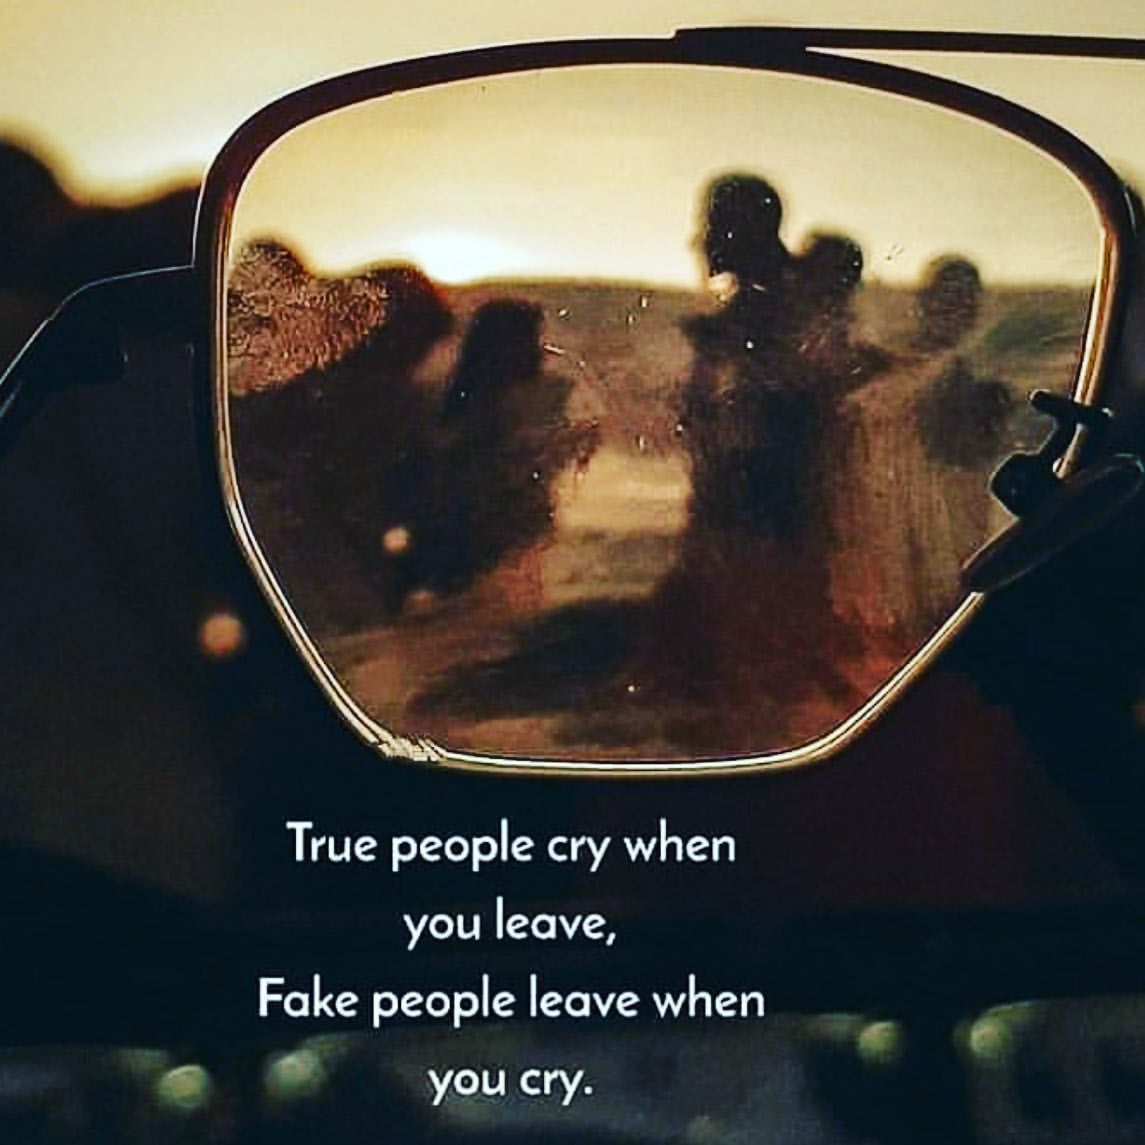 True people cry when you leave, fake people leave when you cry.